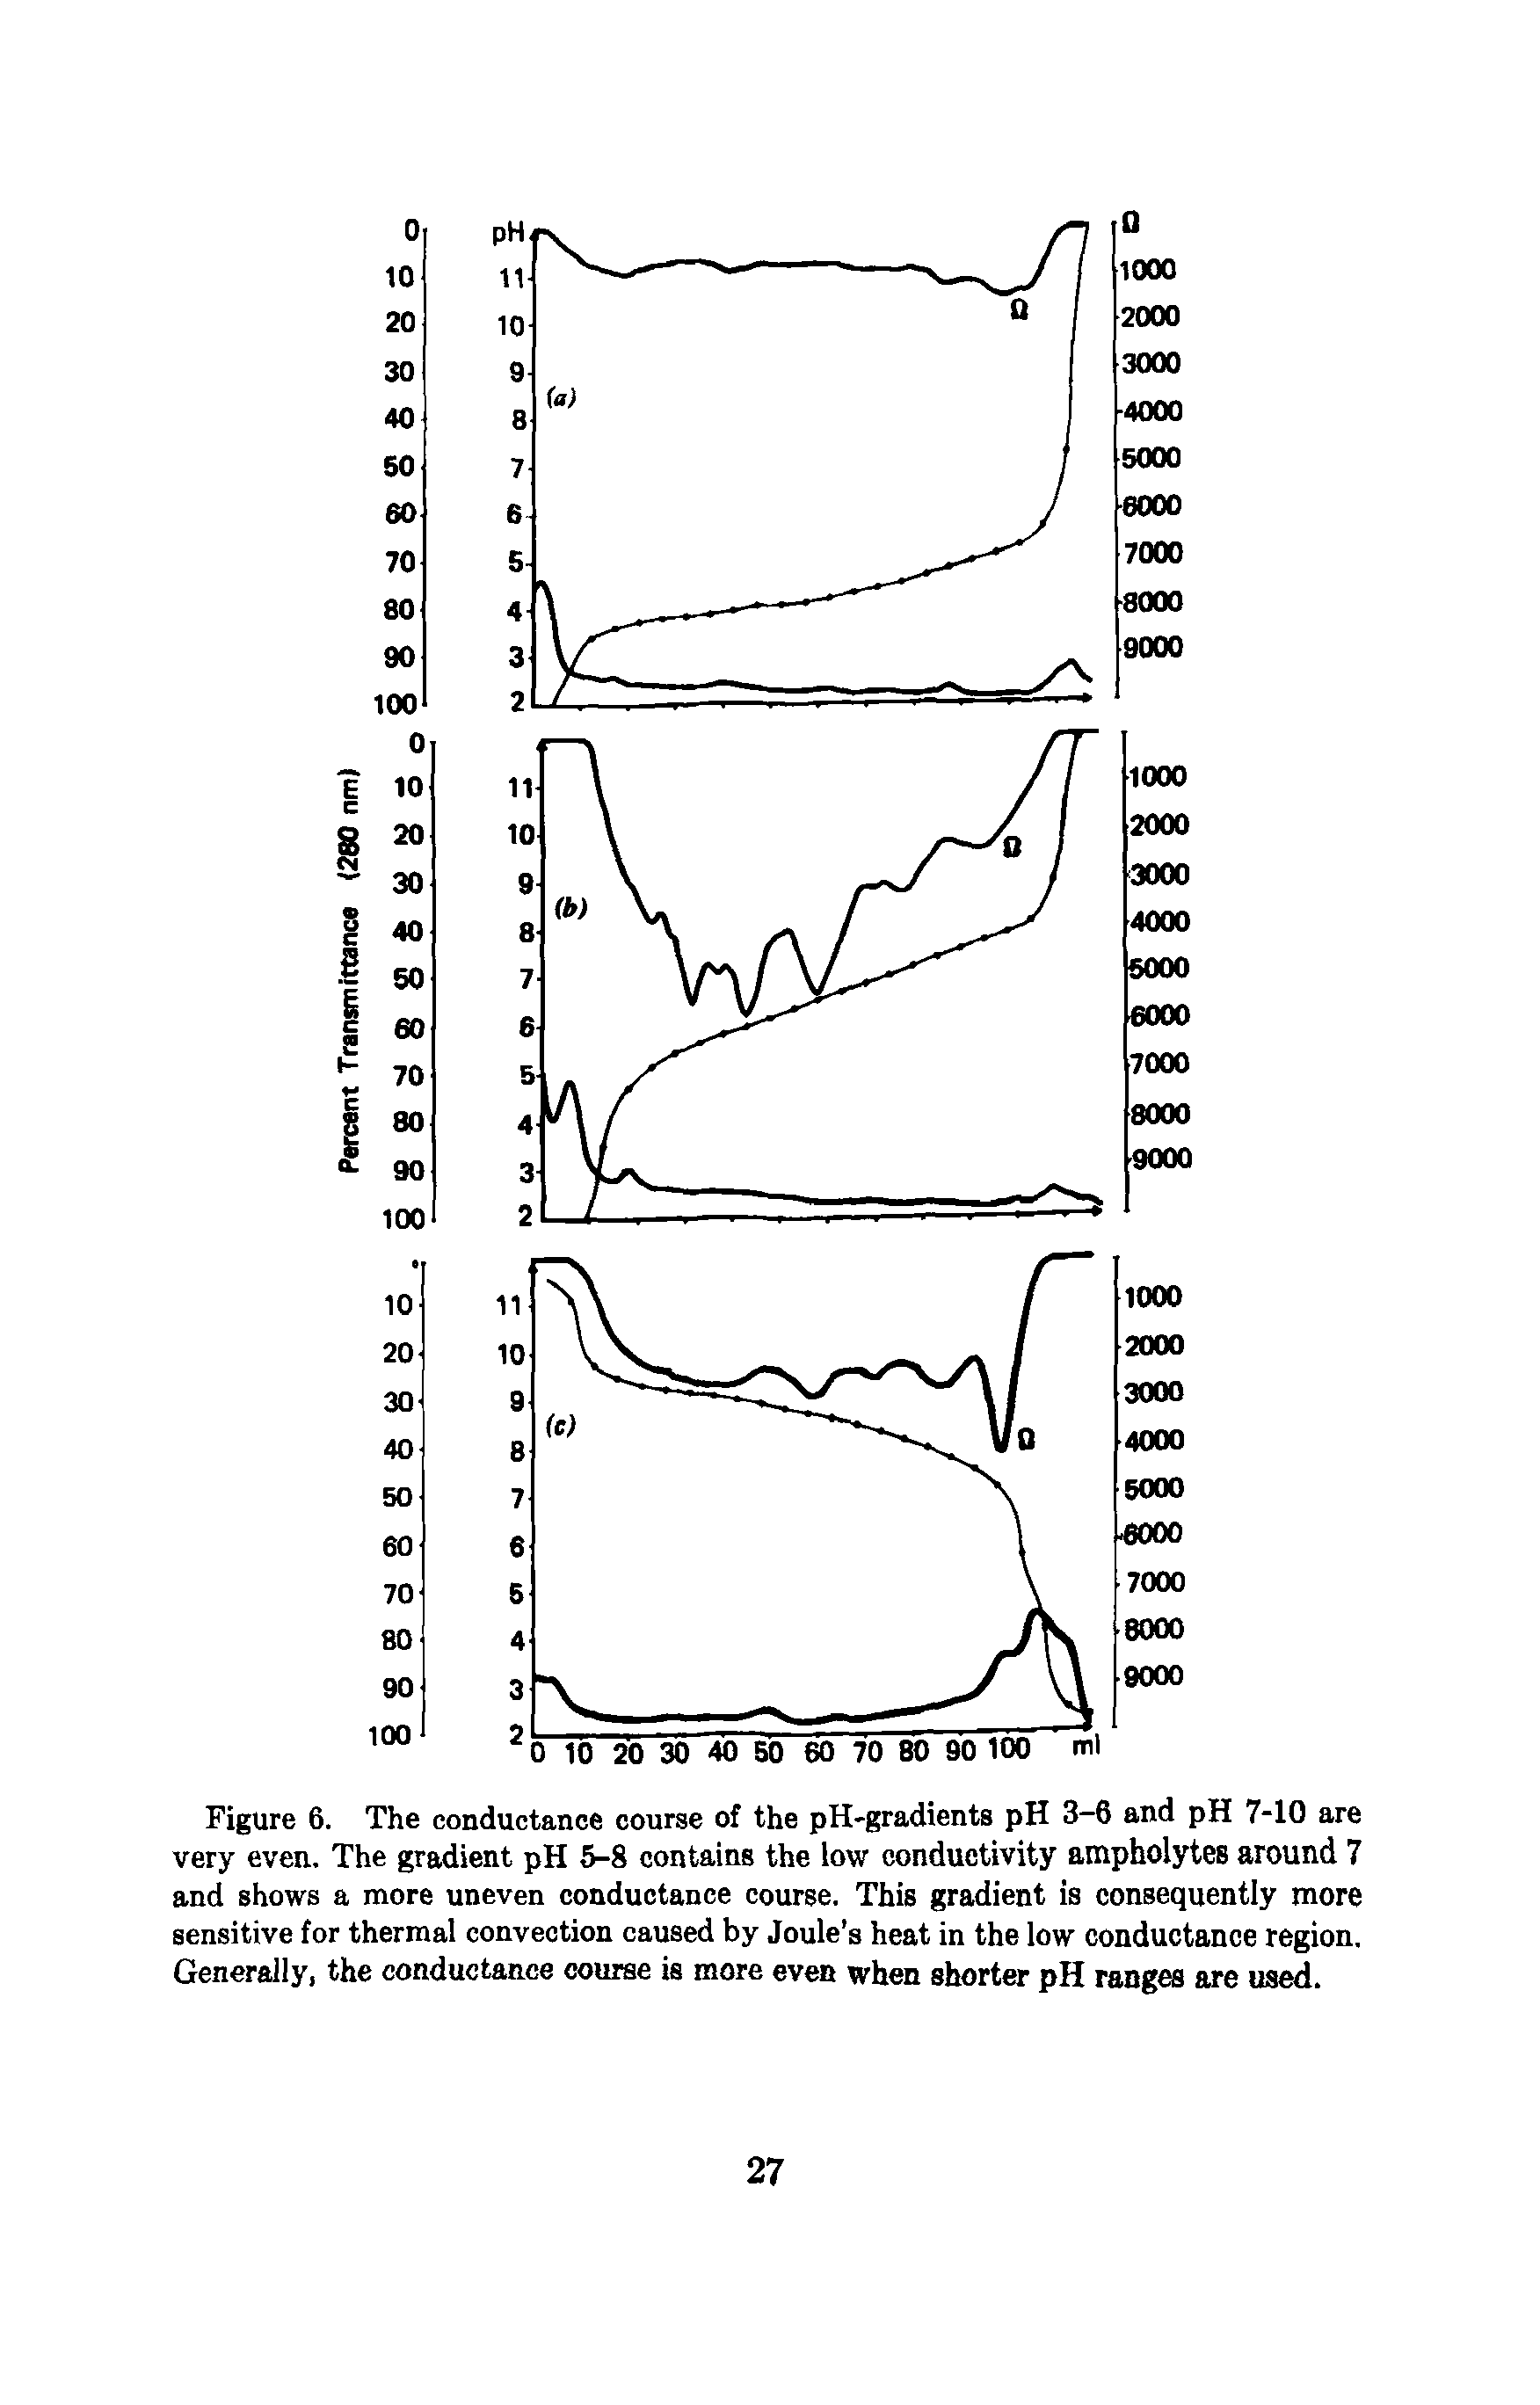 Figure 6. The conductance course of the pH-gradients pH 3-6 and pH 7-10 are very even. The gradient pH 5-8 contains the low conductivity ampholytes around 7 and shows a more uneven conductance course. This gradient is consequently more sensitive for thermal convection caused by Joule s heat in the low conductance region. Generally, the conductance course is more even when shorter pH ranges are used.